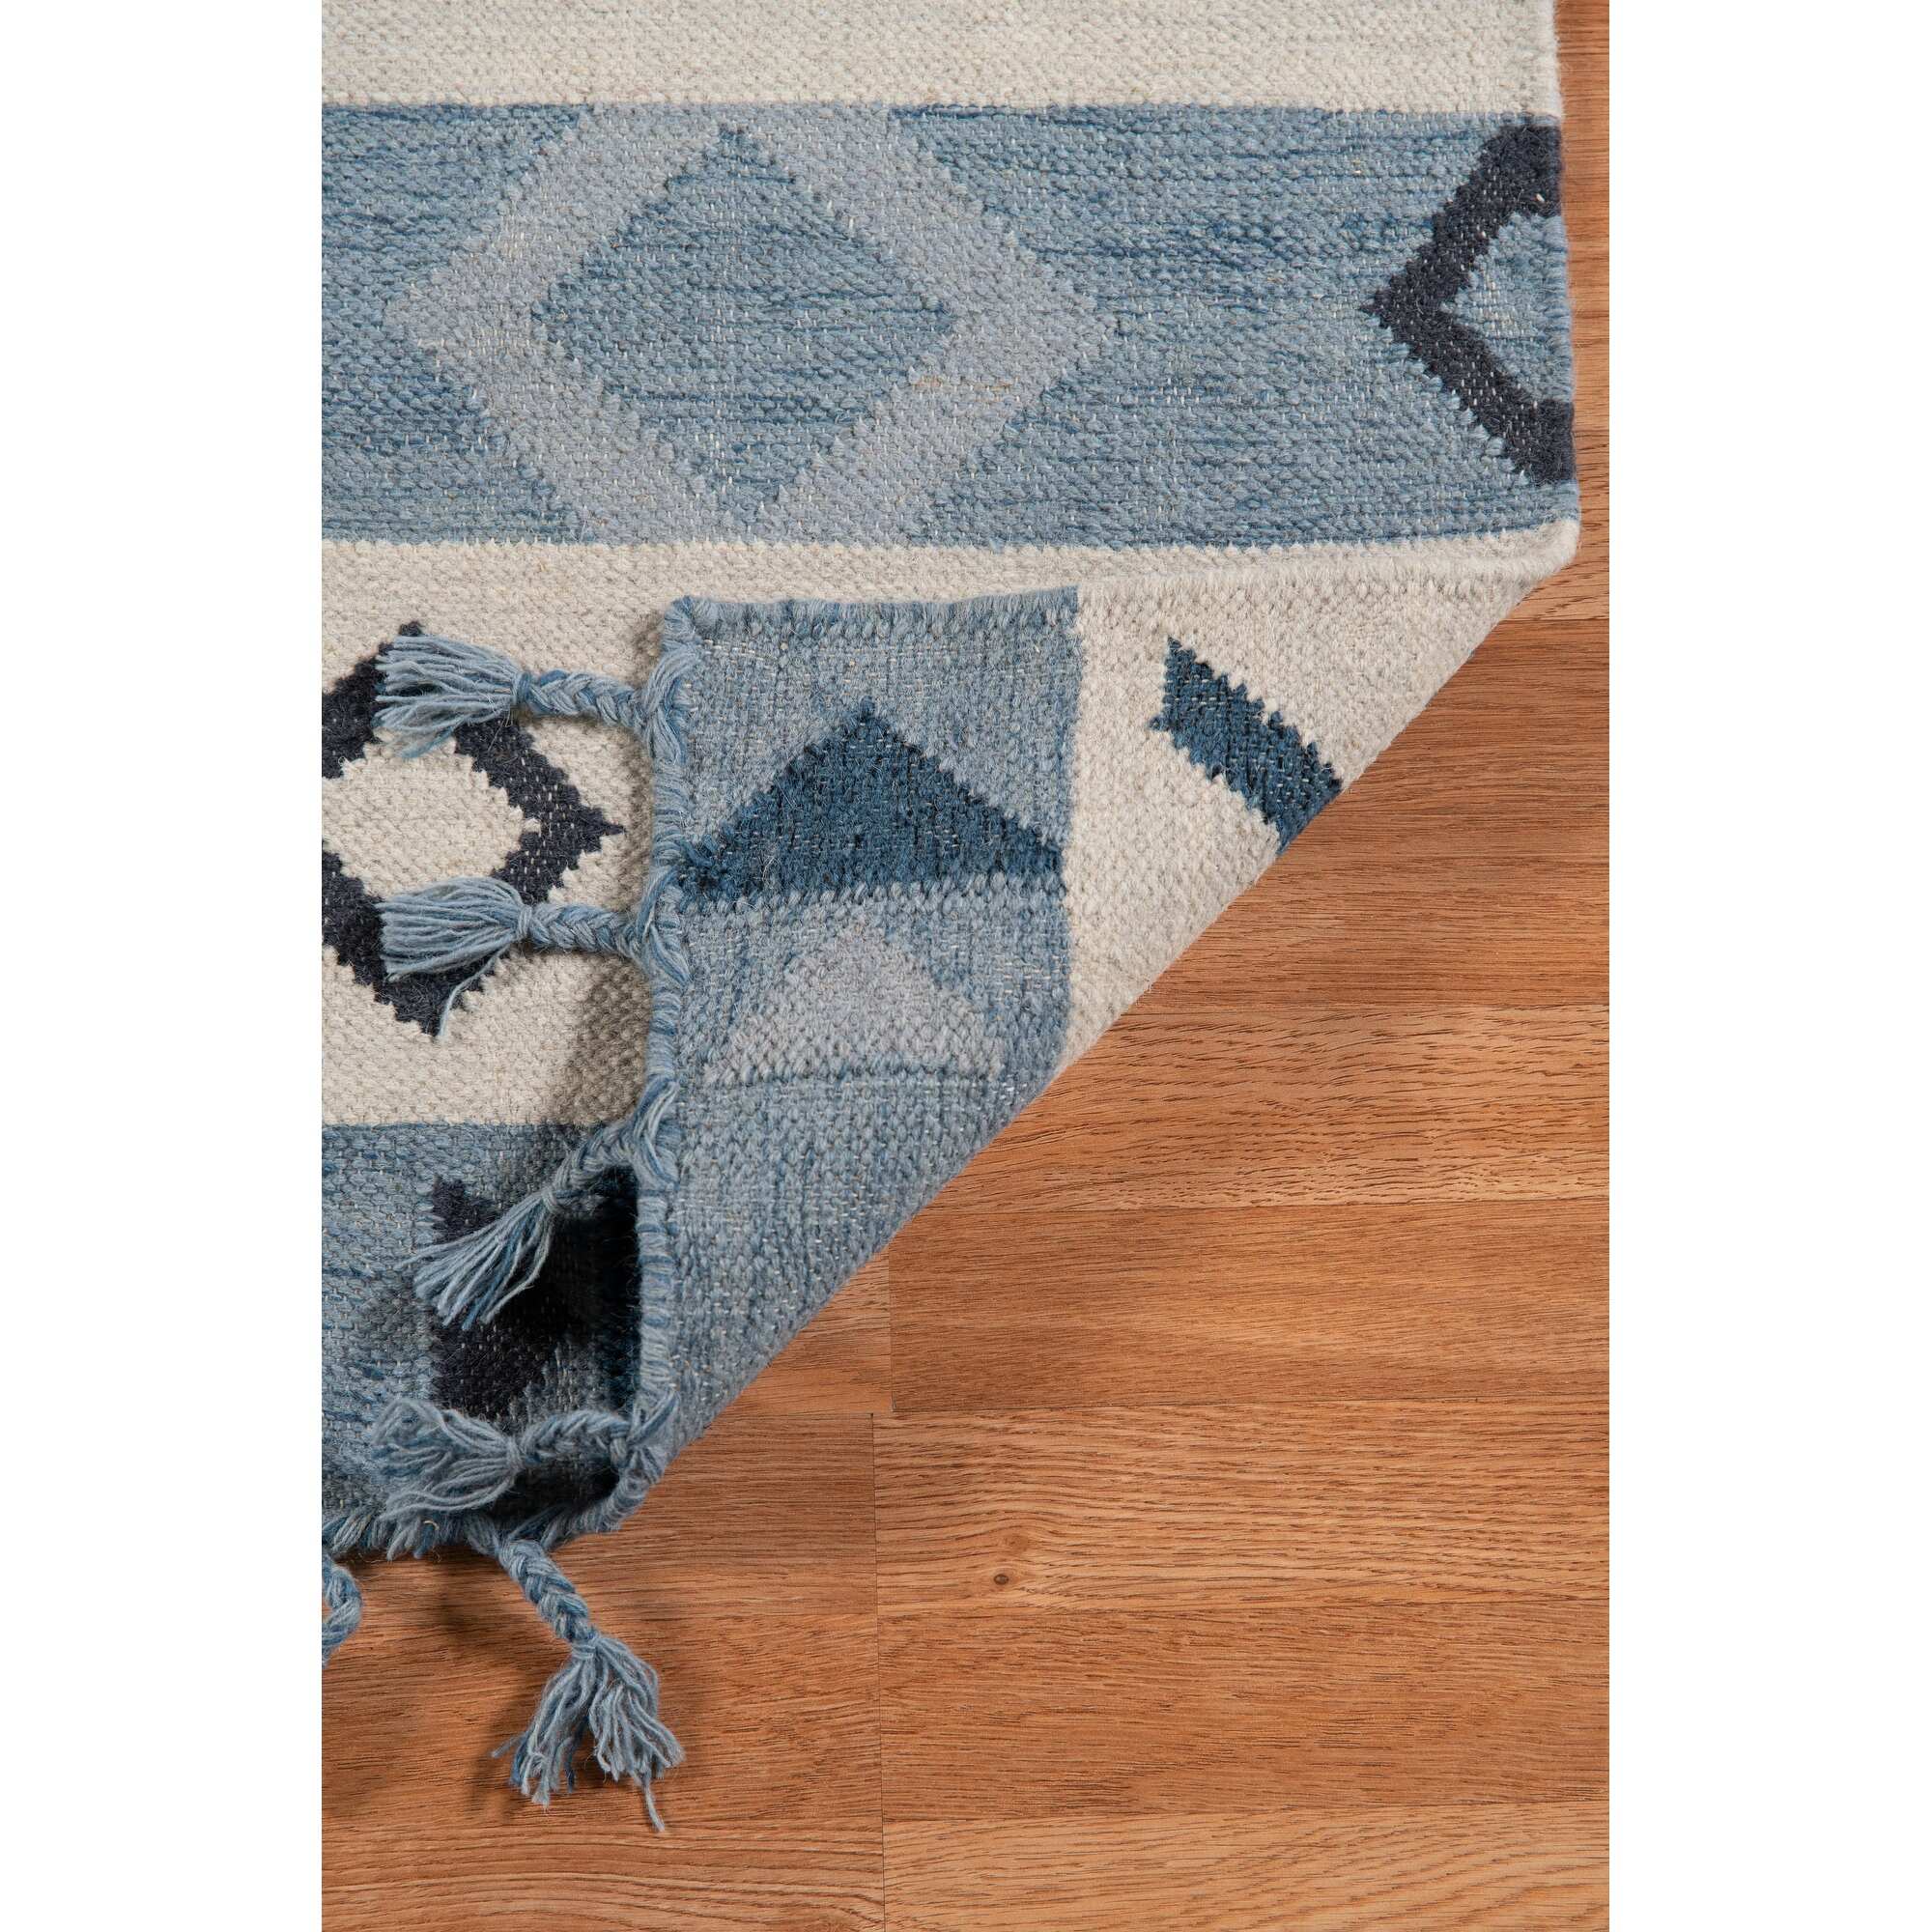 The Curated Nomad Sorrel Tribal Design Flatweave Area Rug